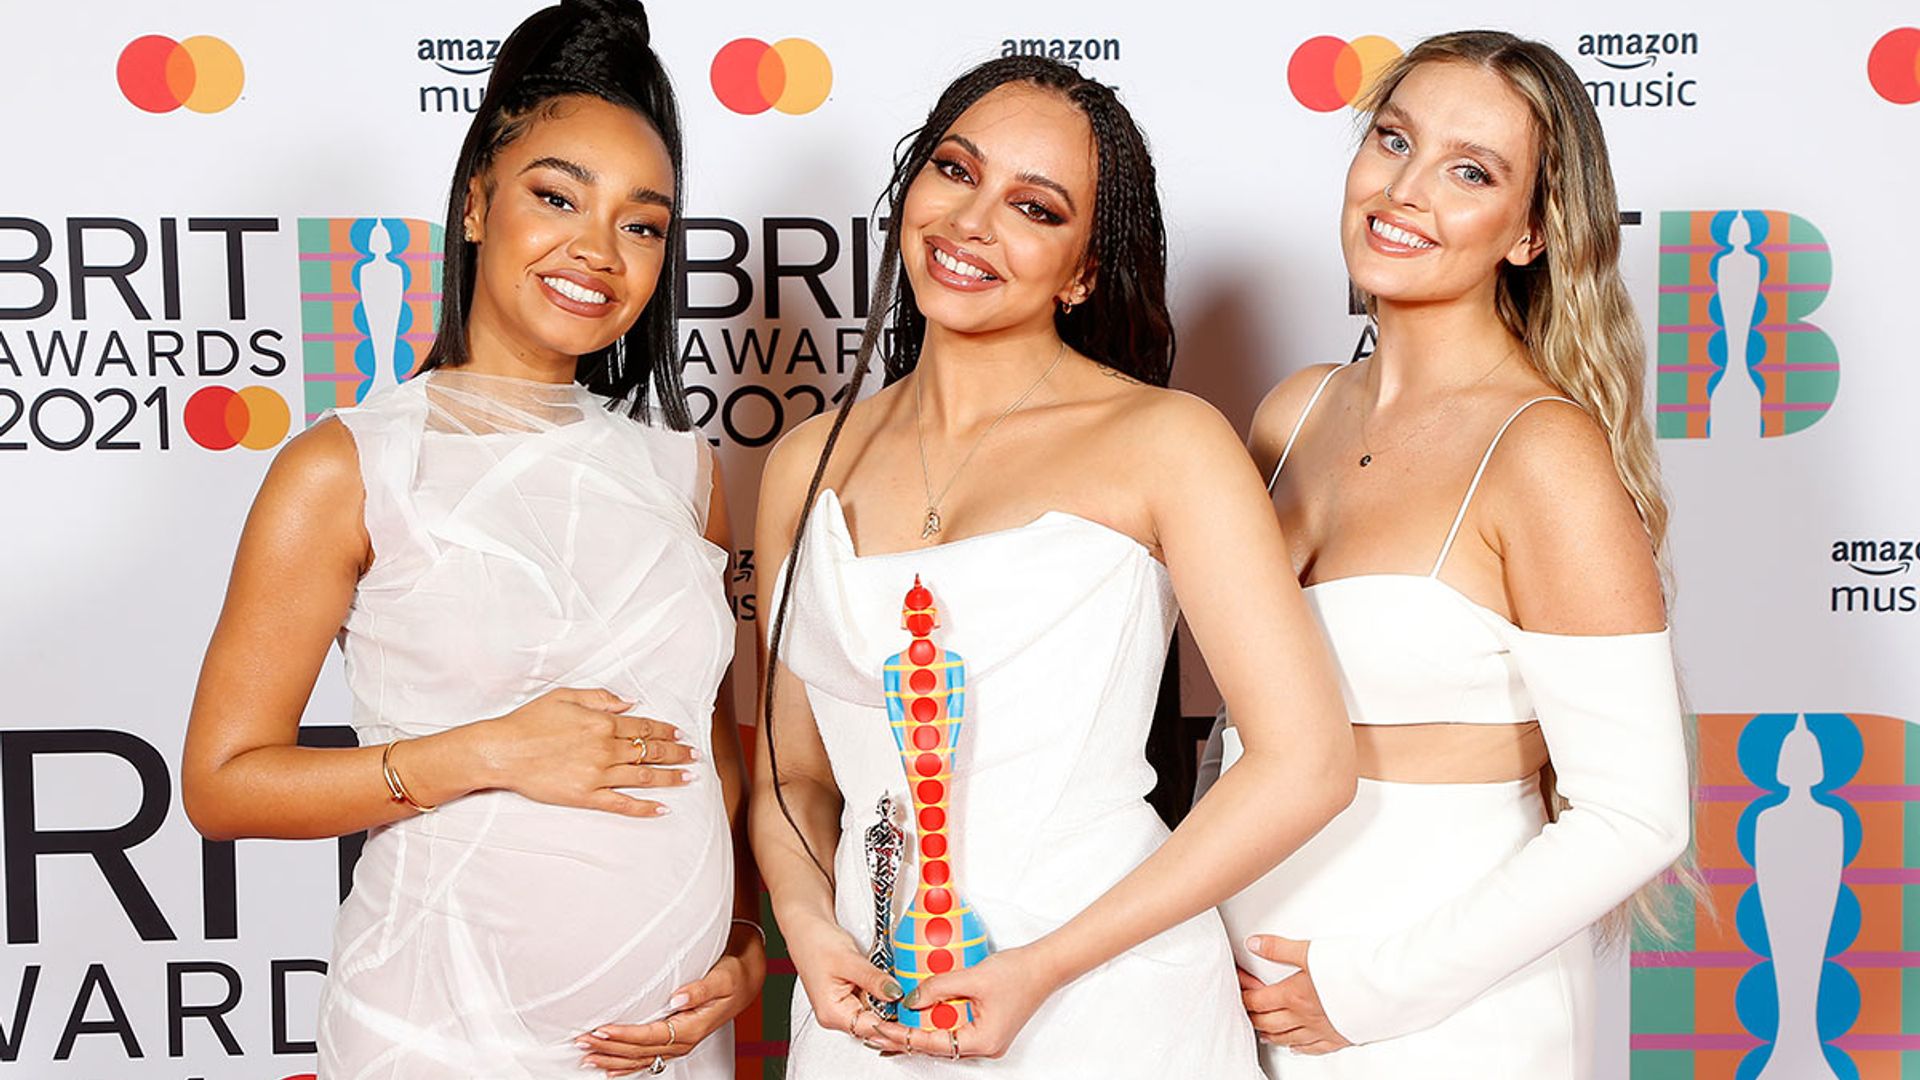 See adorable baby photos from Little Mix mums Leigh-Anne Pinnock and Perrie Edwards